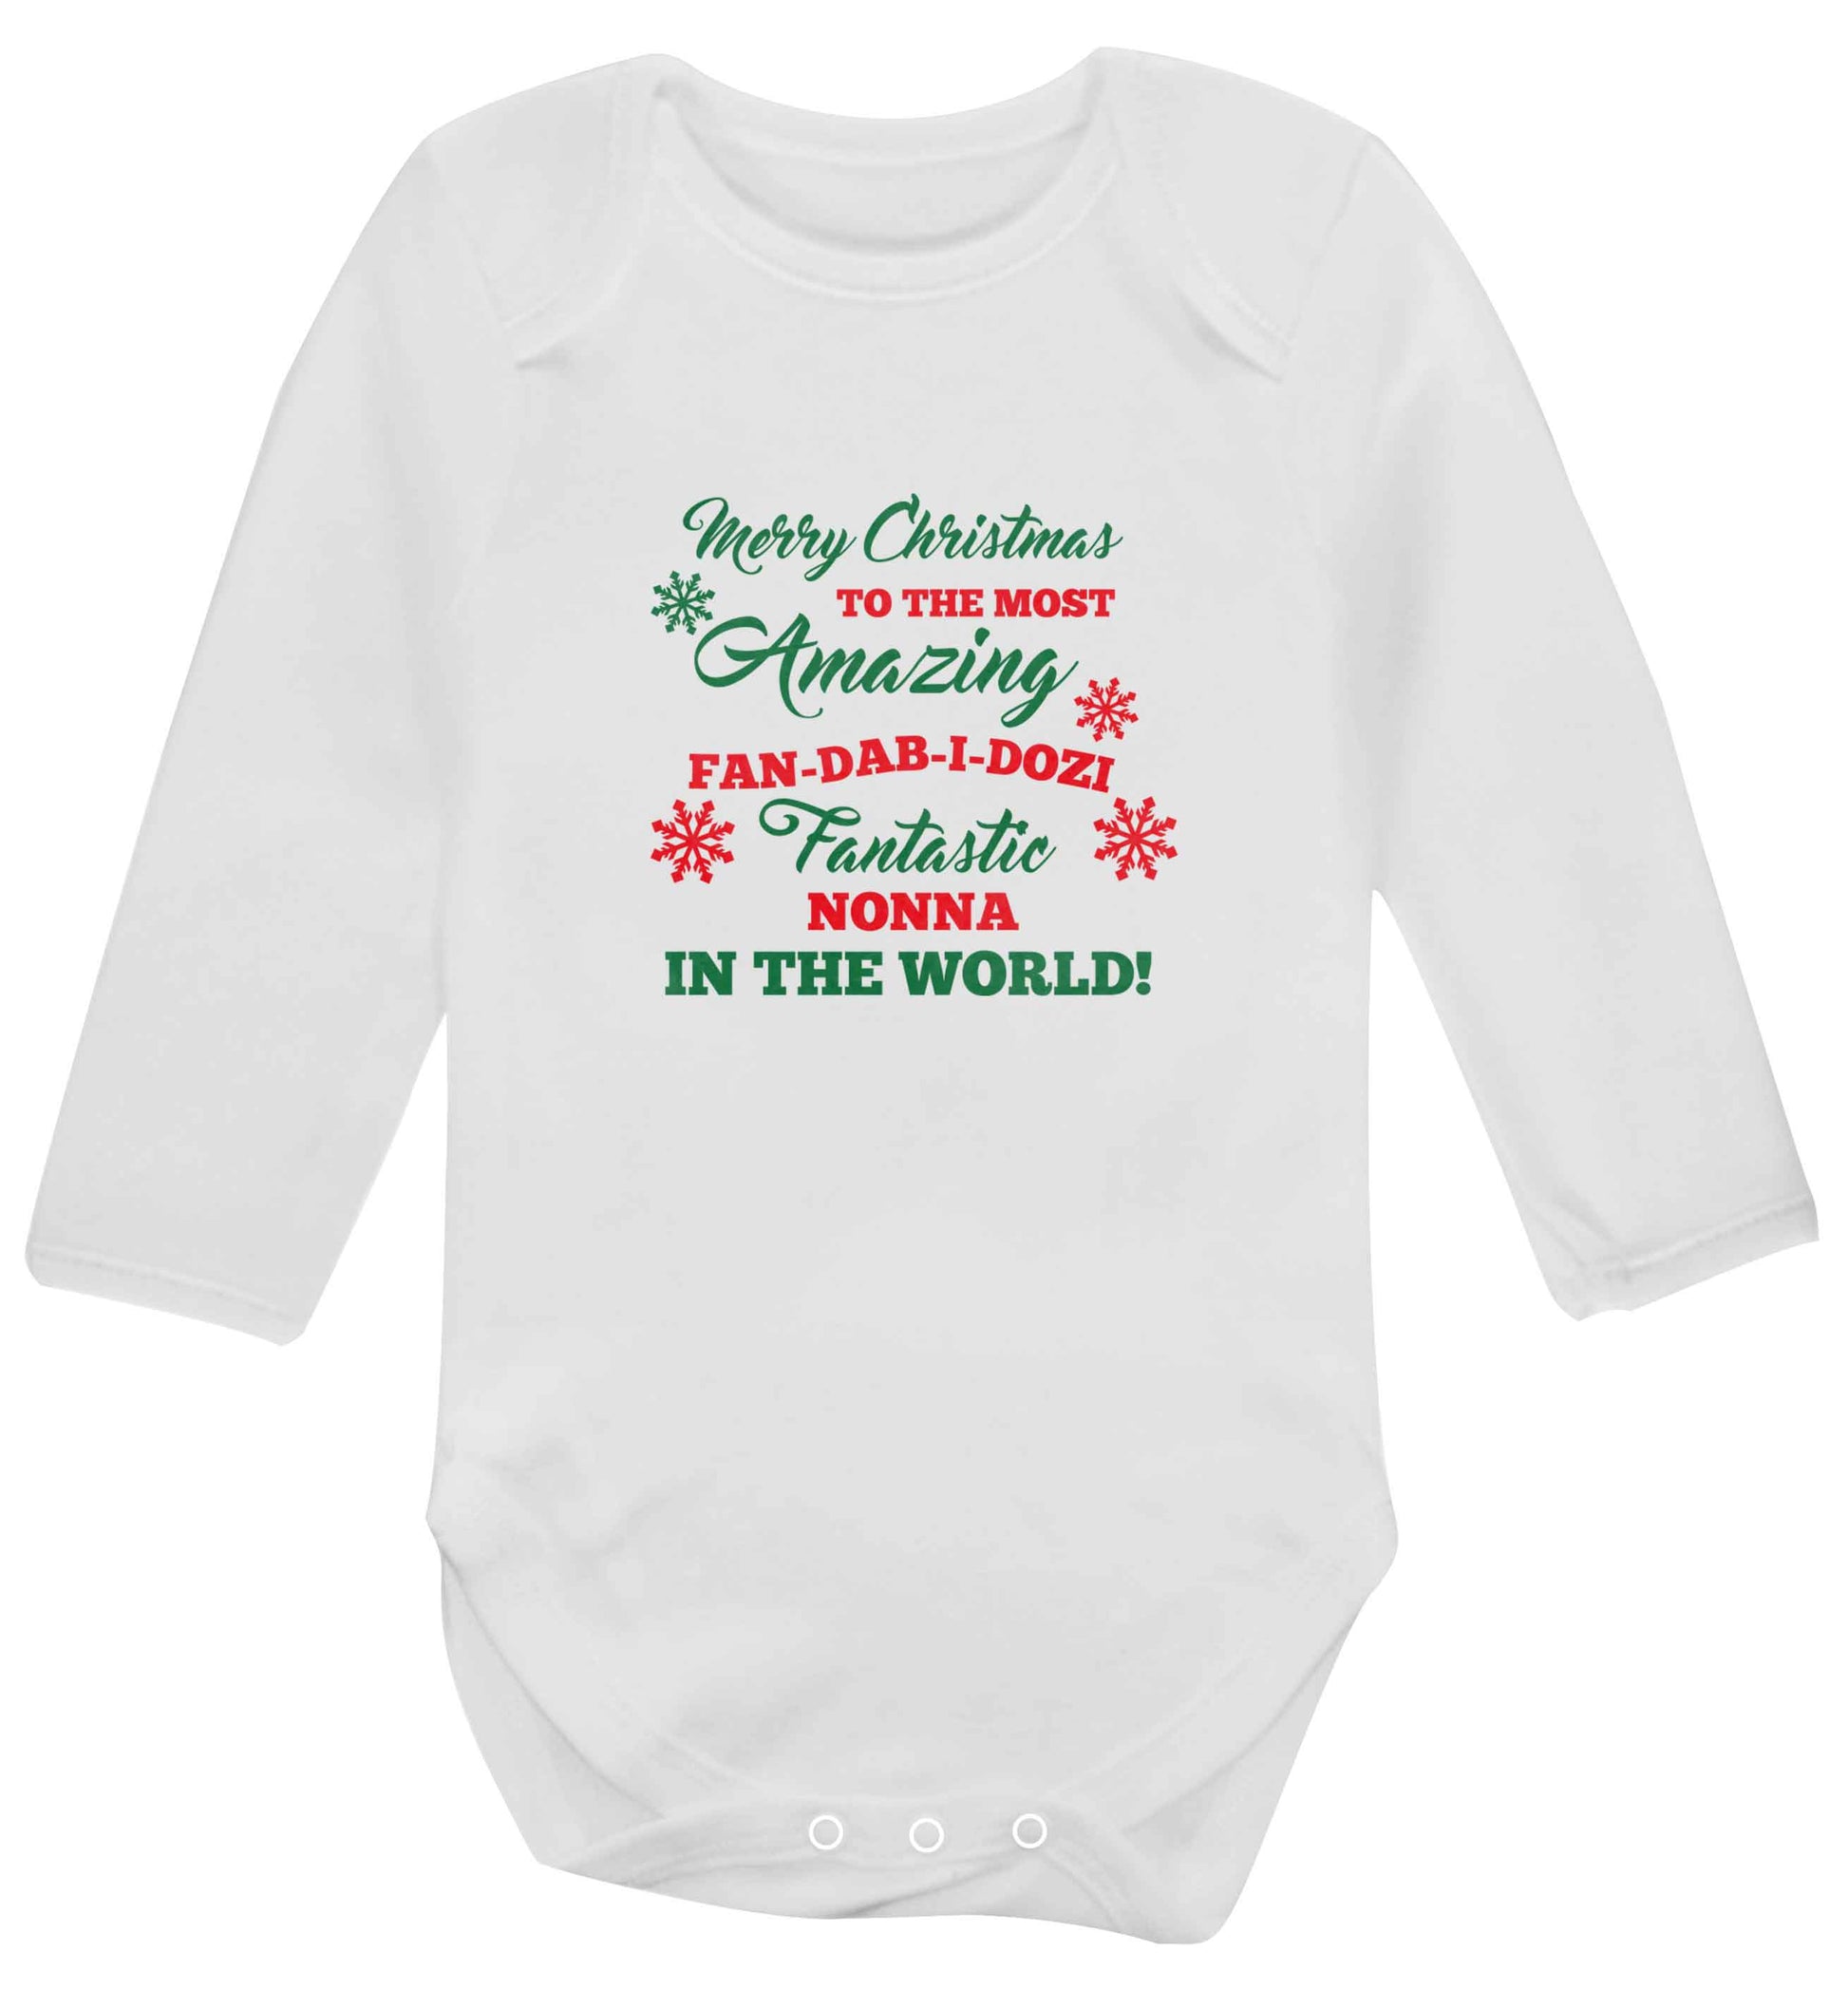 Merry Christmas to the most amazing fan-dab-i-dozi fantasic Nonna in the world baby vest long sleeved white 6-12 months